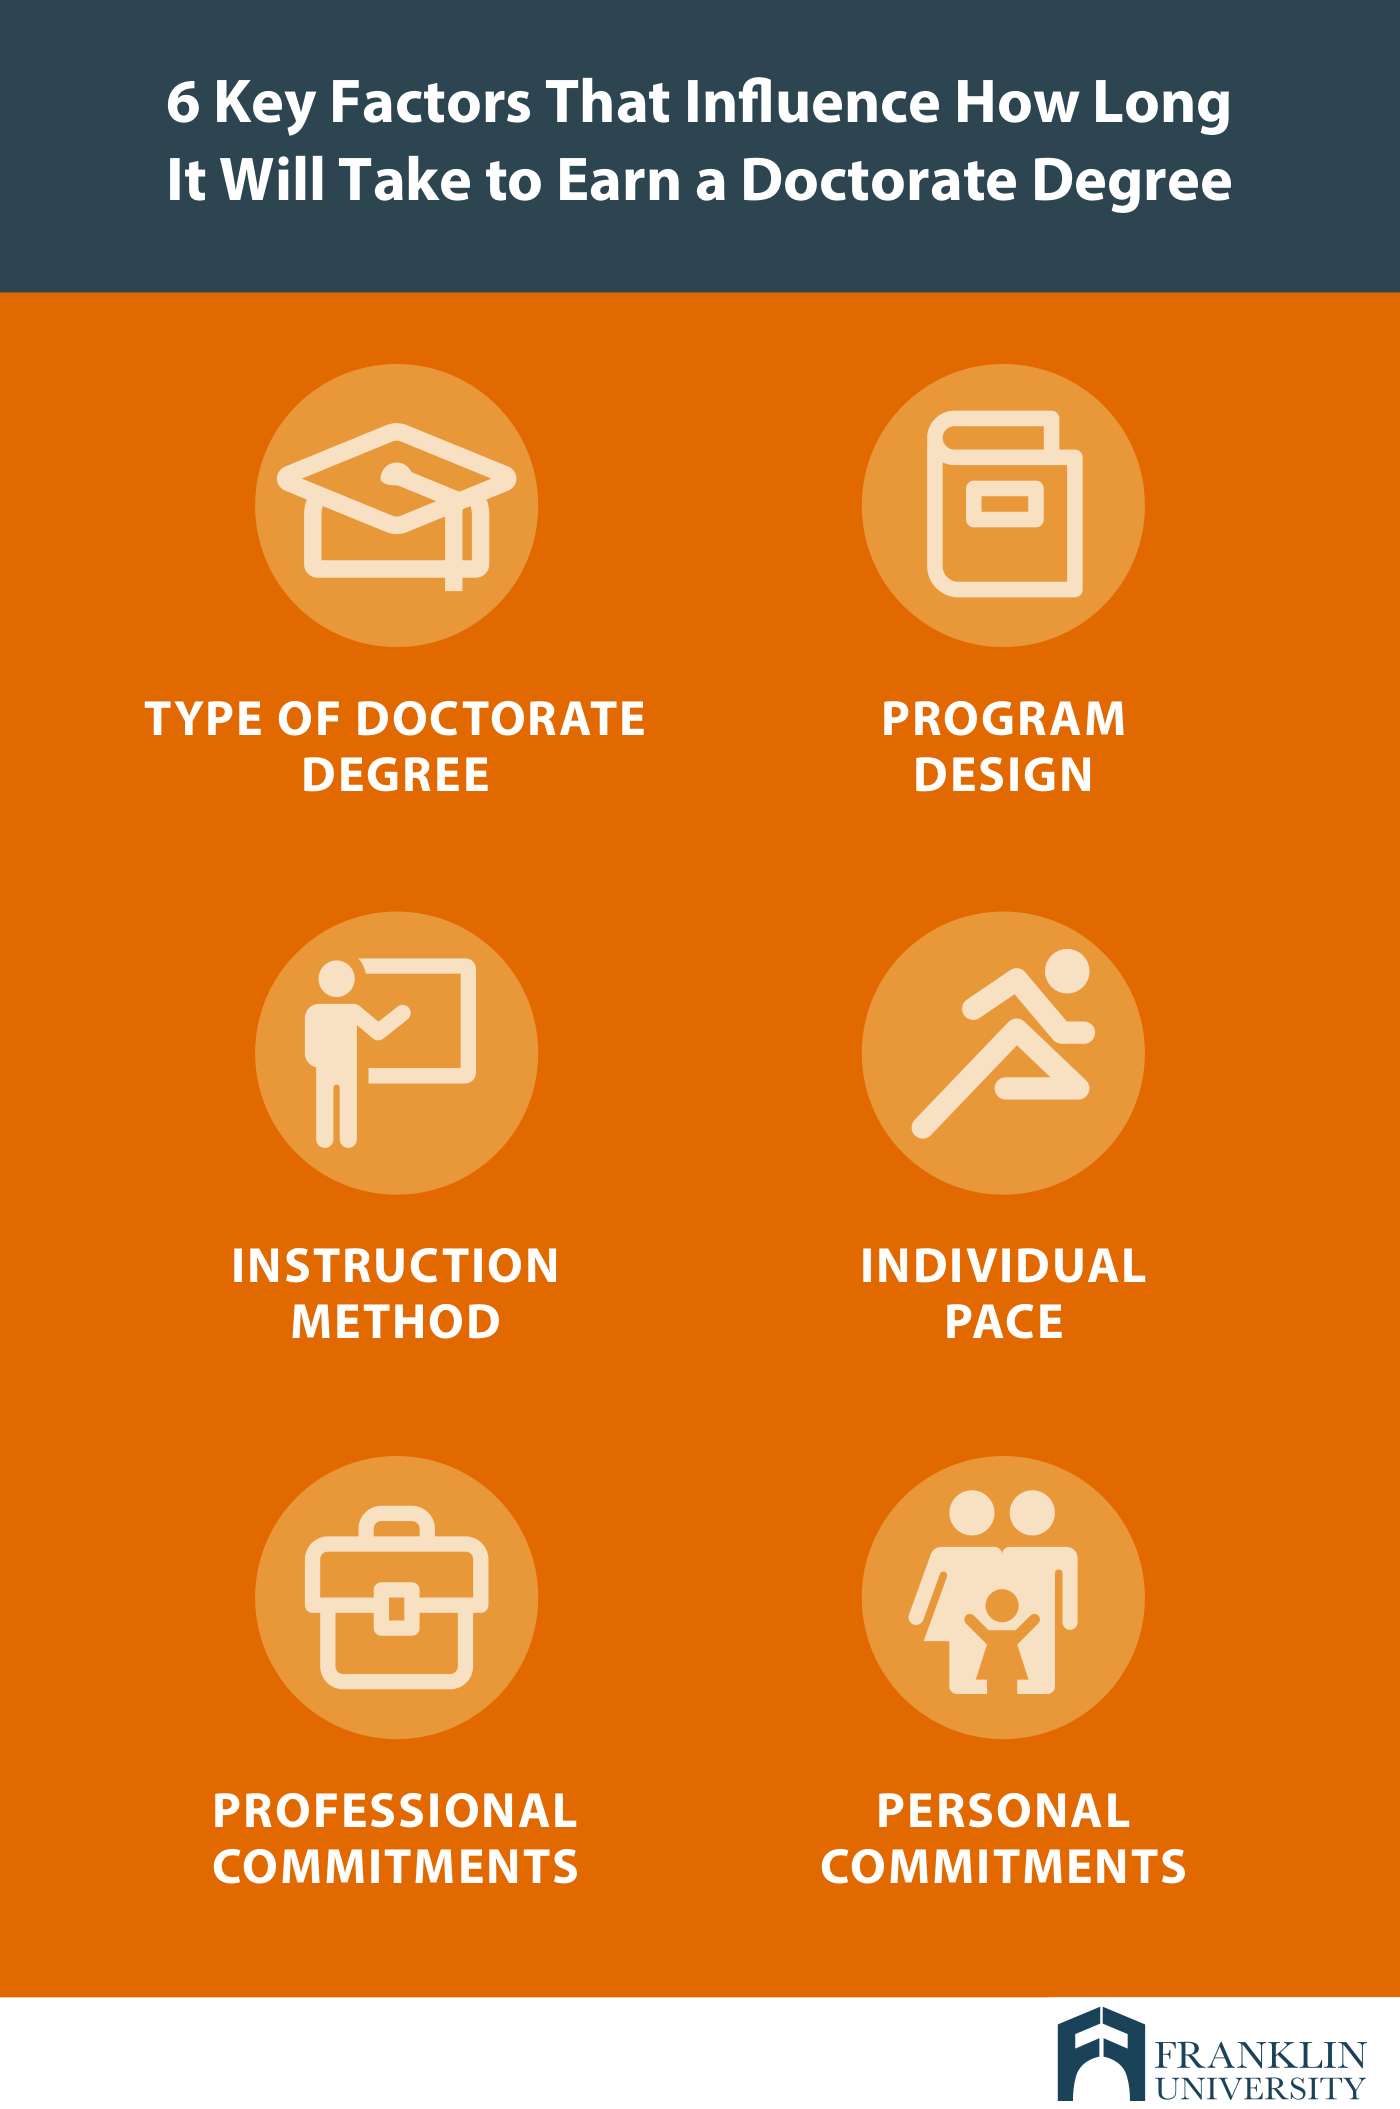 graphic describing 6 key factors that influence how long it will take to earn a doctorate degree